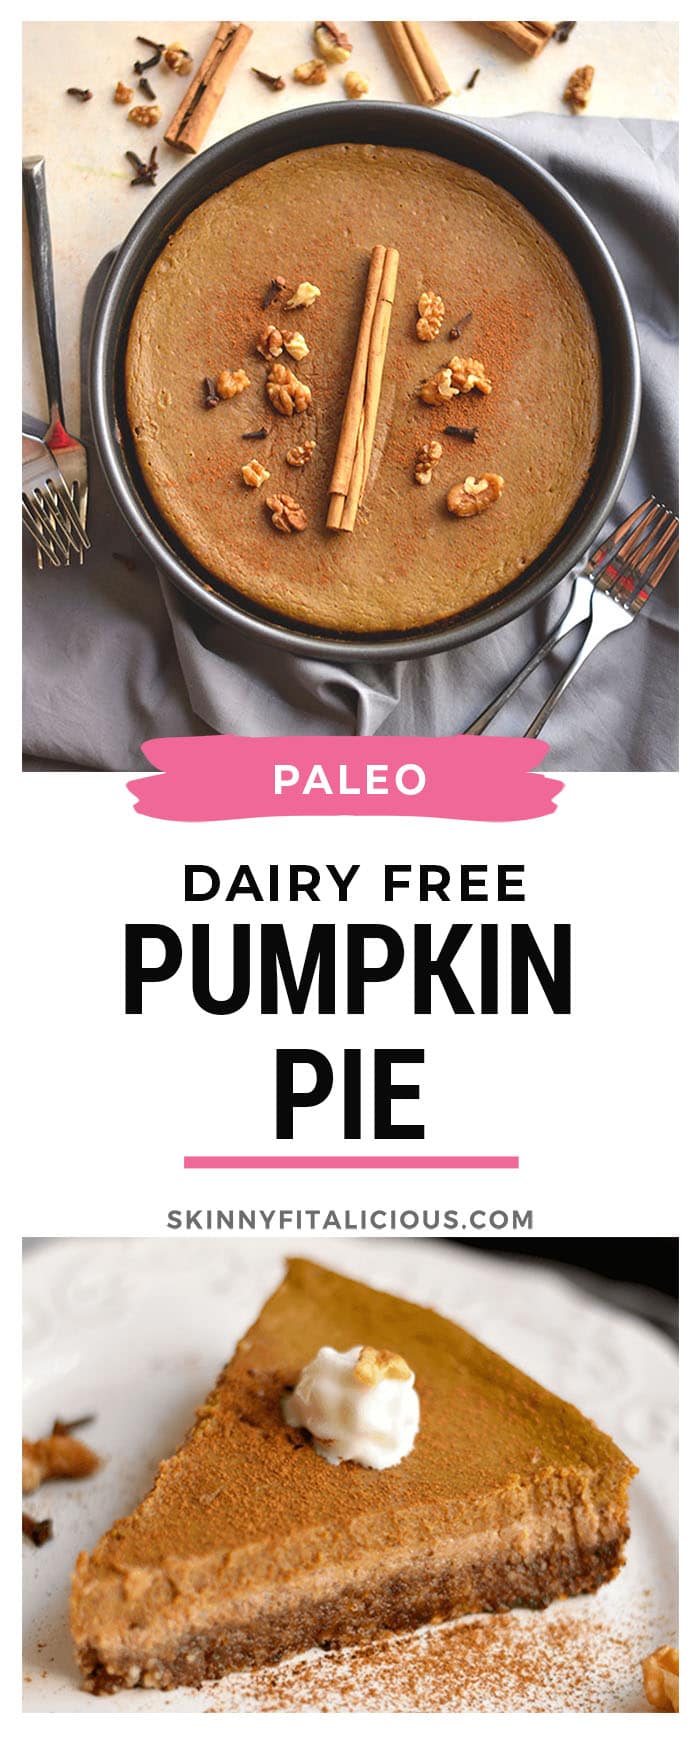 This Healthy Pumpkin Pie made with an addicting walnut date crust and topped with pumpkin custard is super easy to make and so delicious you won't want to share! What pumpkin pie dreams are made of!  Gluten Free + Low Calorie + Paleo